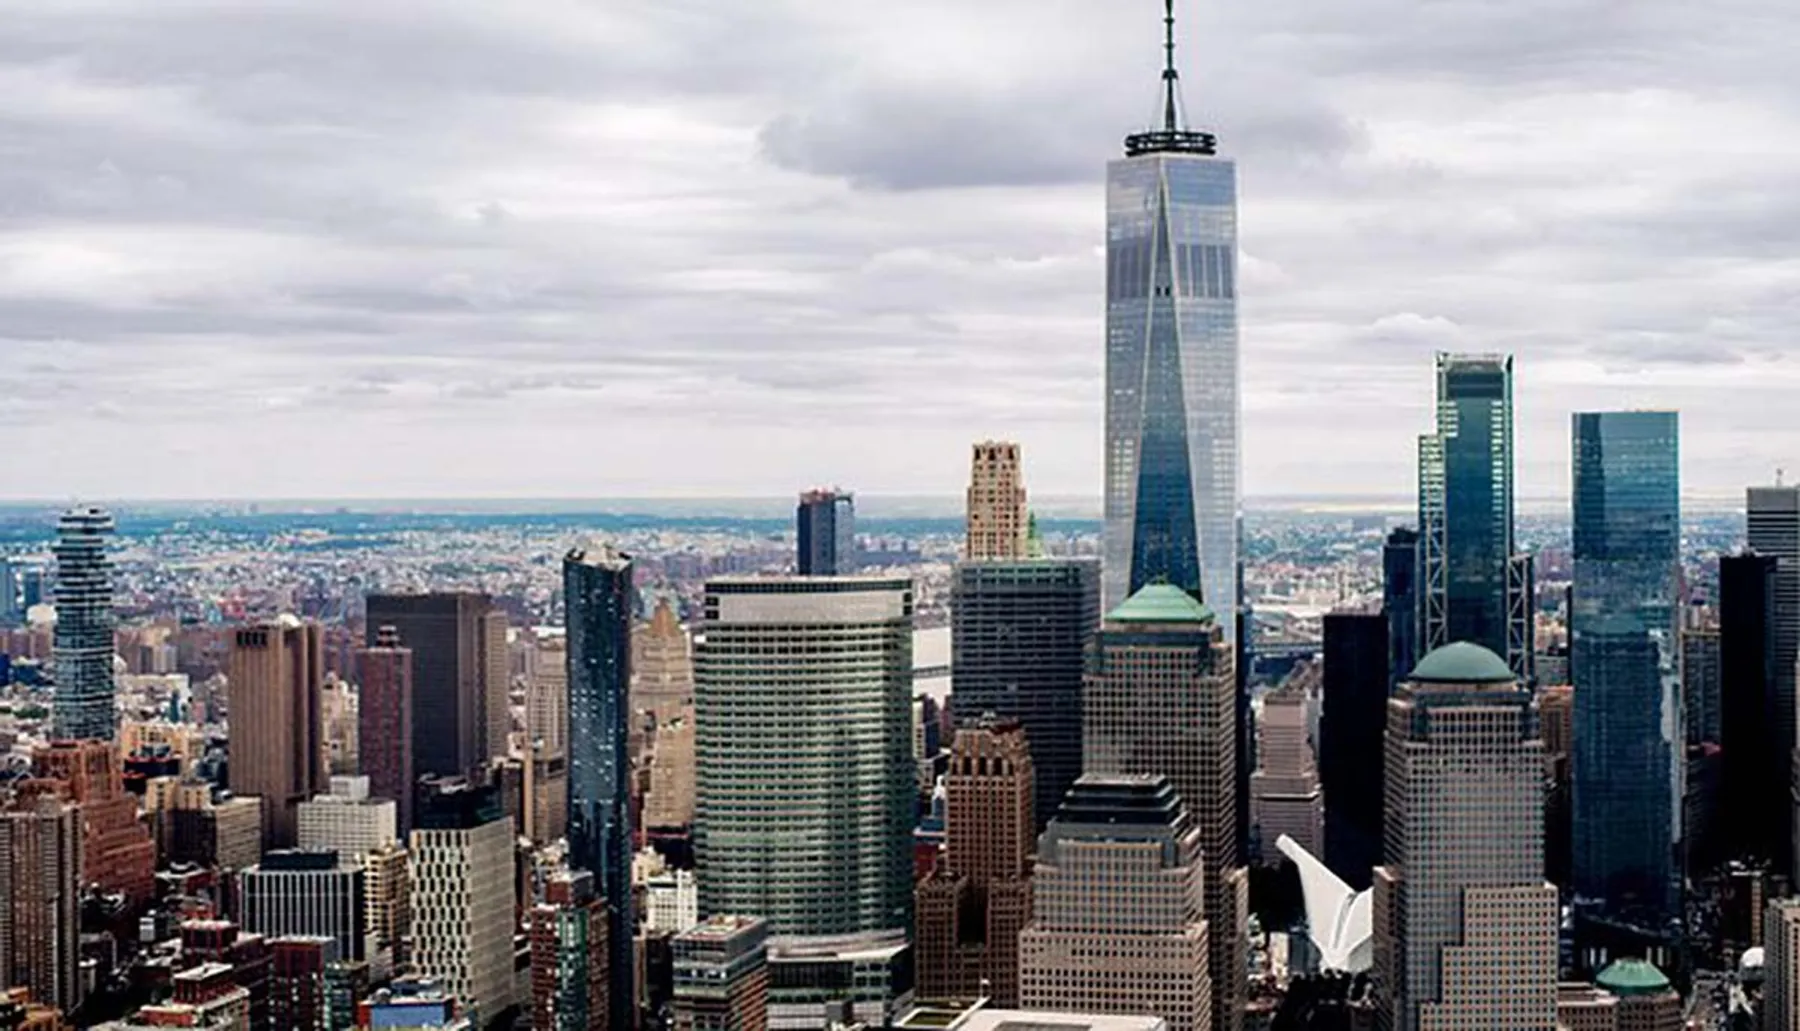 The image is an aerial view of a dense urban skyline dominated by the One World Trade Center amidst numerous skyscrapers, likely depicting Lower Manhattan in New York City.